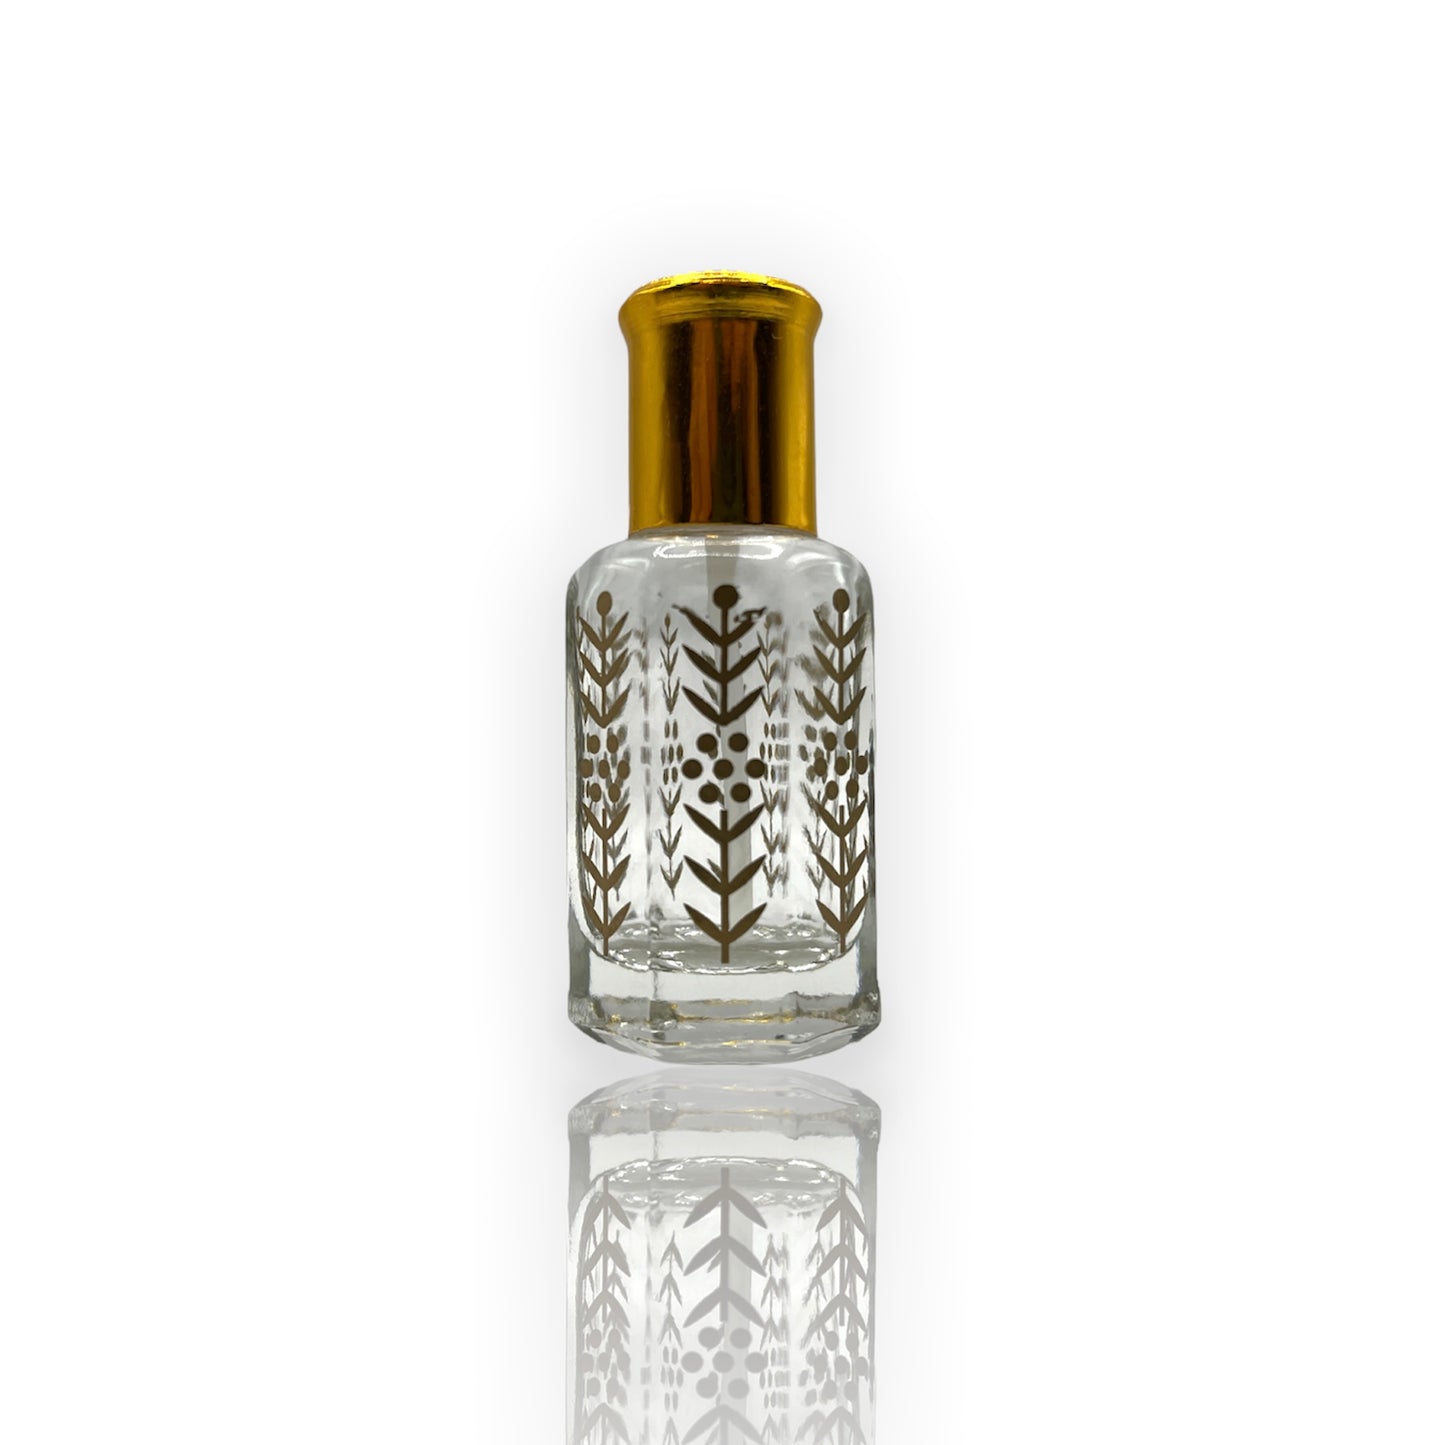 M-01 Oil Perfume *Inspired by Sauvage